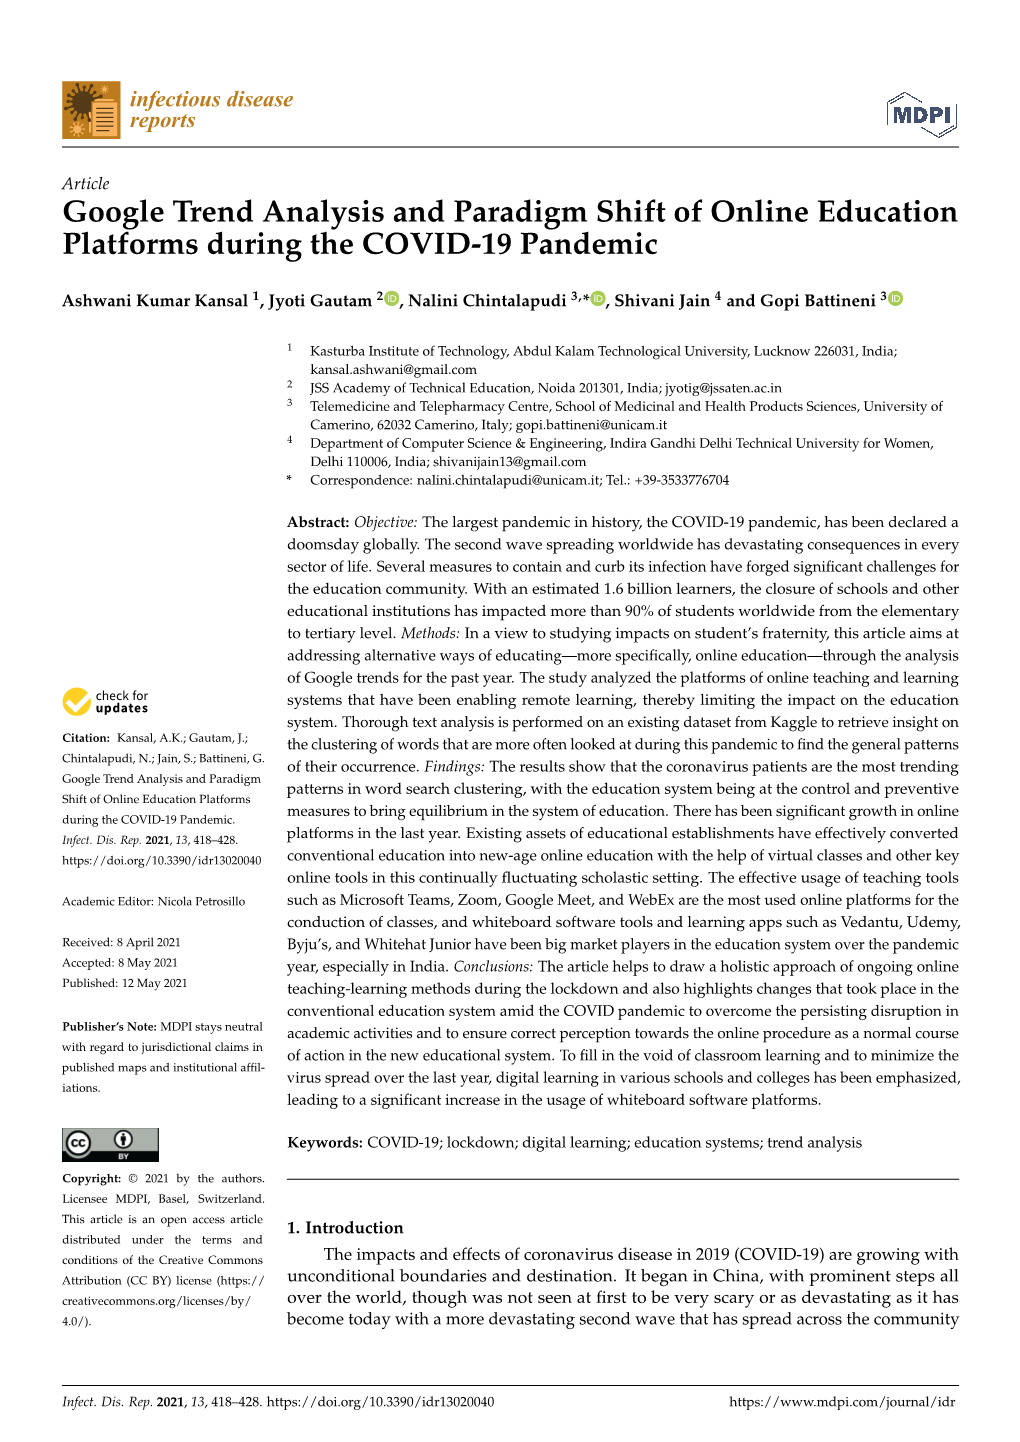 Google Trend Analysis and Paradigm Shift of Online Education Platforms During the COVID-19 Pandemic